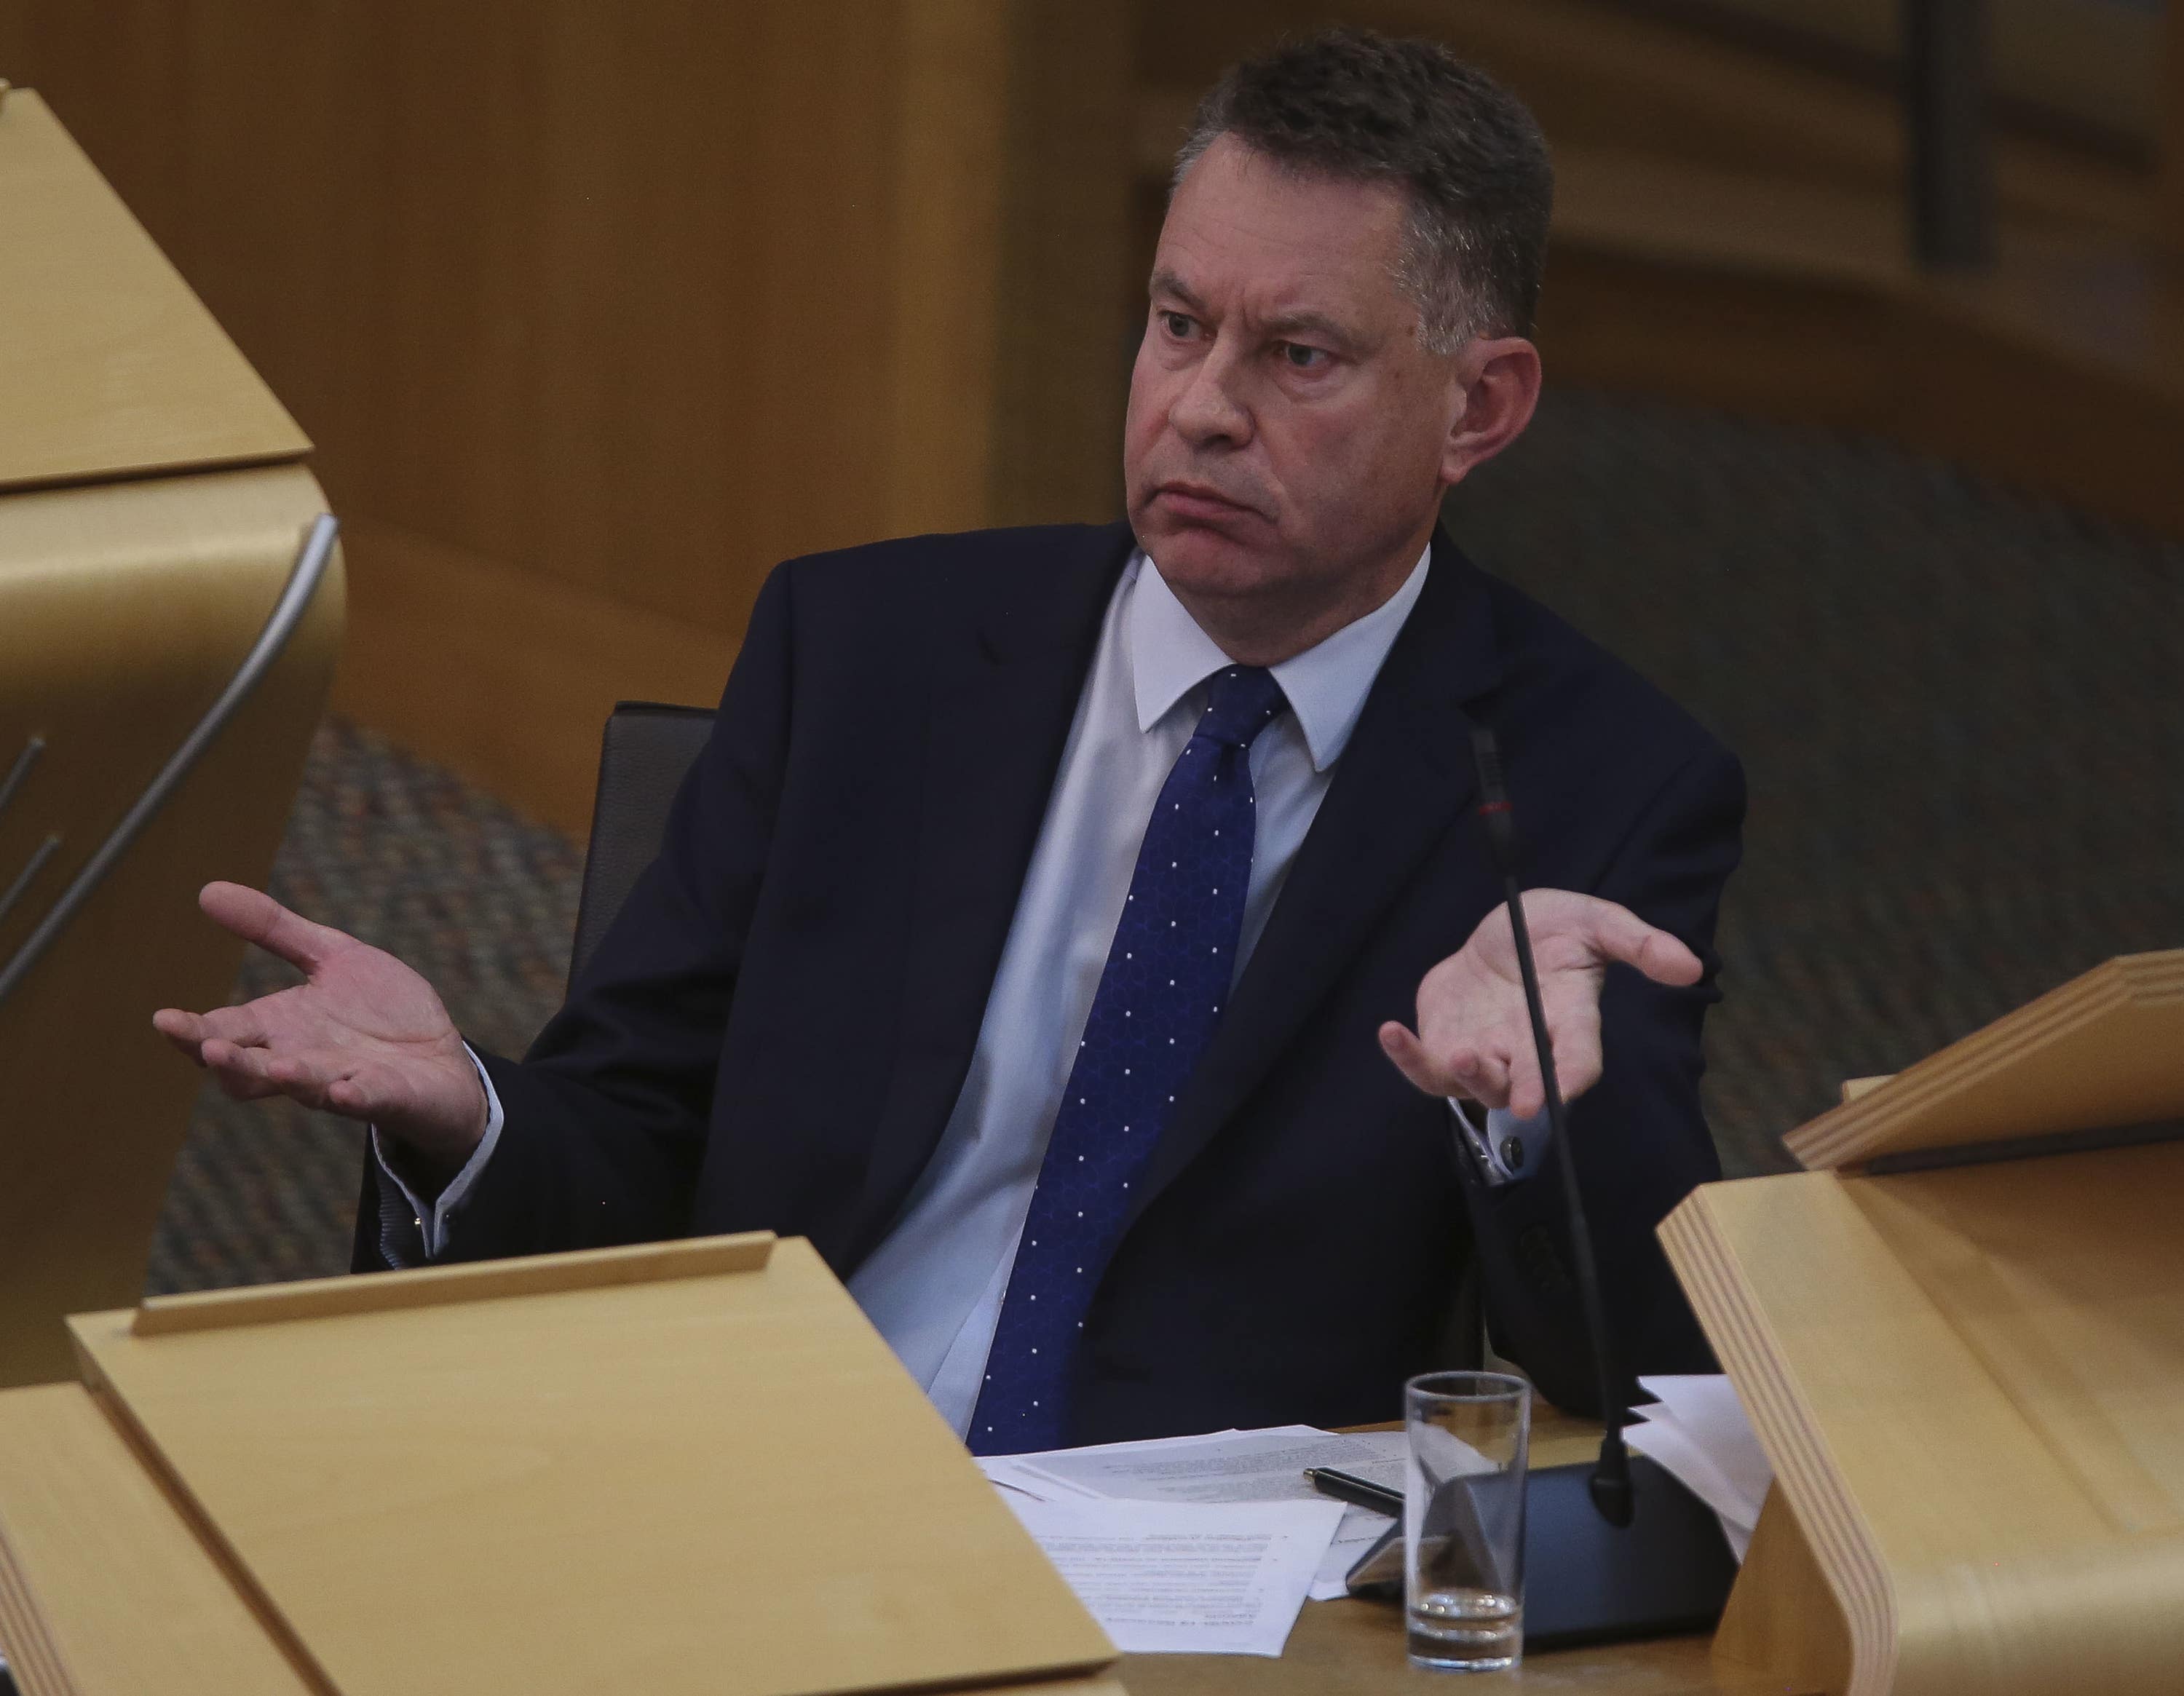 Tory business spokesman Murdo Fraser said the Scottish Government is ‘hampering’ business.